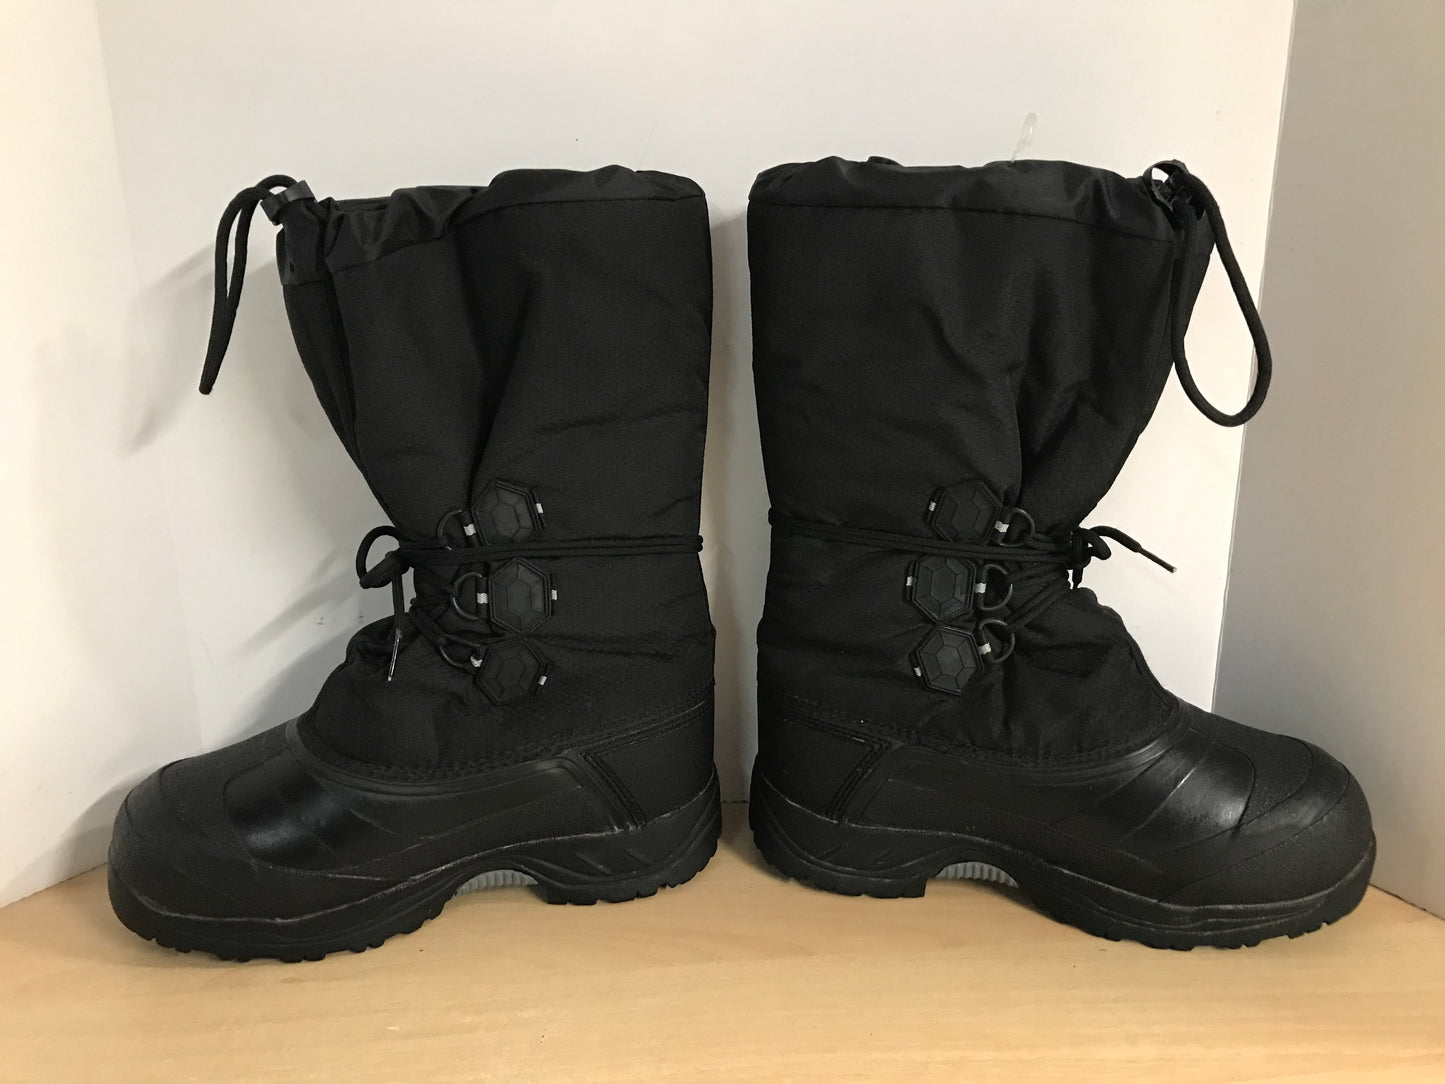 Winter Boots Men's Size 9 Wind River -100 Degree Storm Boots With Liner As New